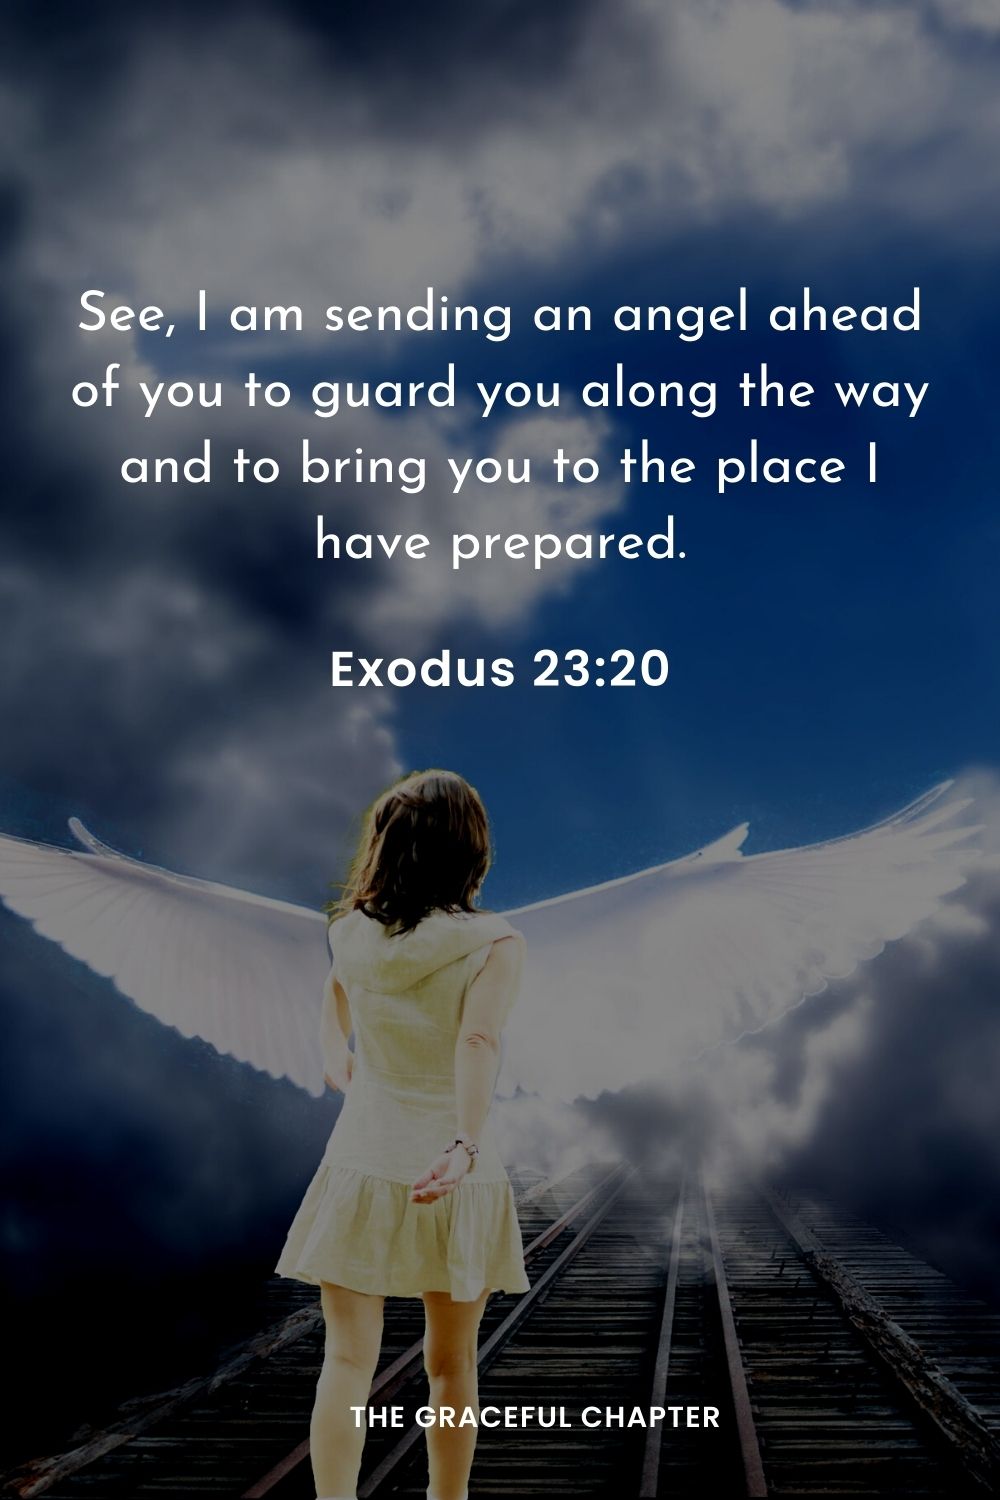 See, I am sending an angel ahead of you to guard you along the way and to bring you to the place I have prepared.